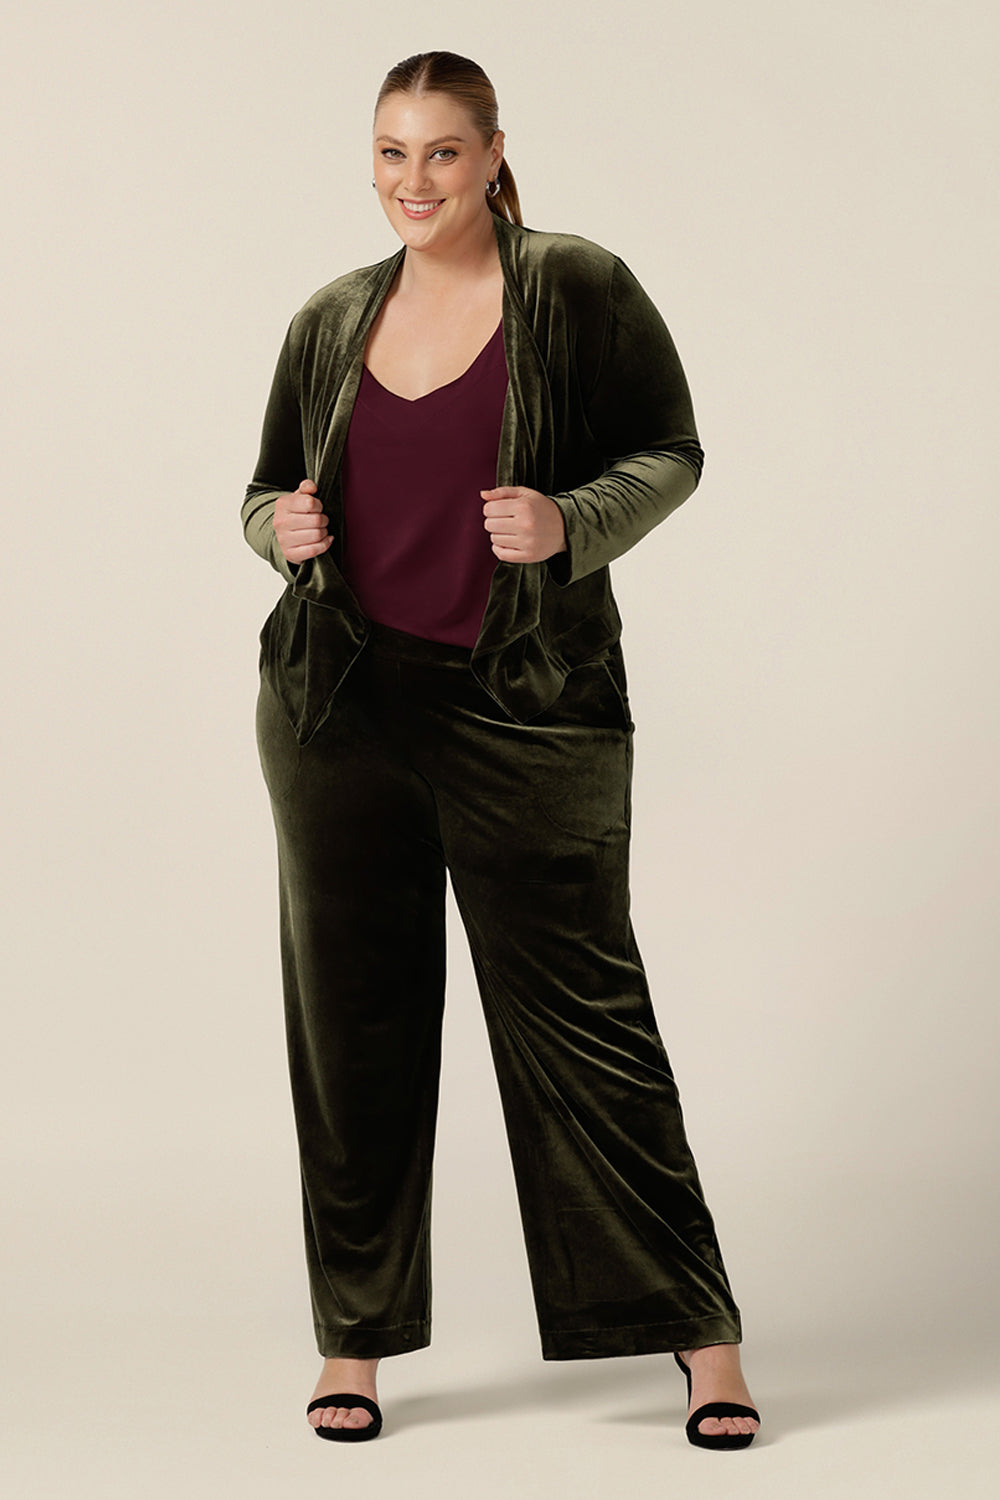 The best cocktail pant suit for plus size women, the Deni Pant and Romy Jacket wear together with a plum cami top for a lougewear tuxedo look. Straight, wide leg pants in green velour, these evening trousers are pull on pants and comfortable in stretch fabric. Shop this occasion and cocktail attire online at Australian fashion brand, Leina & Fleur.